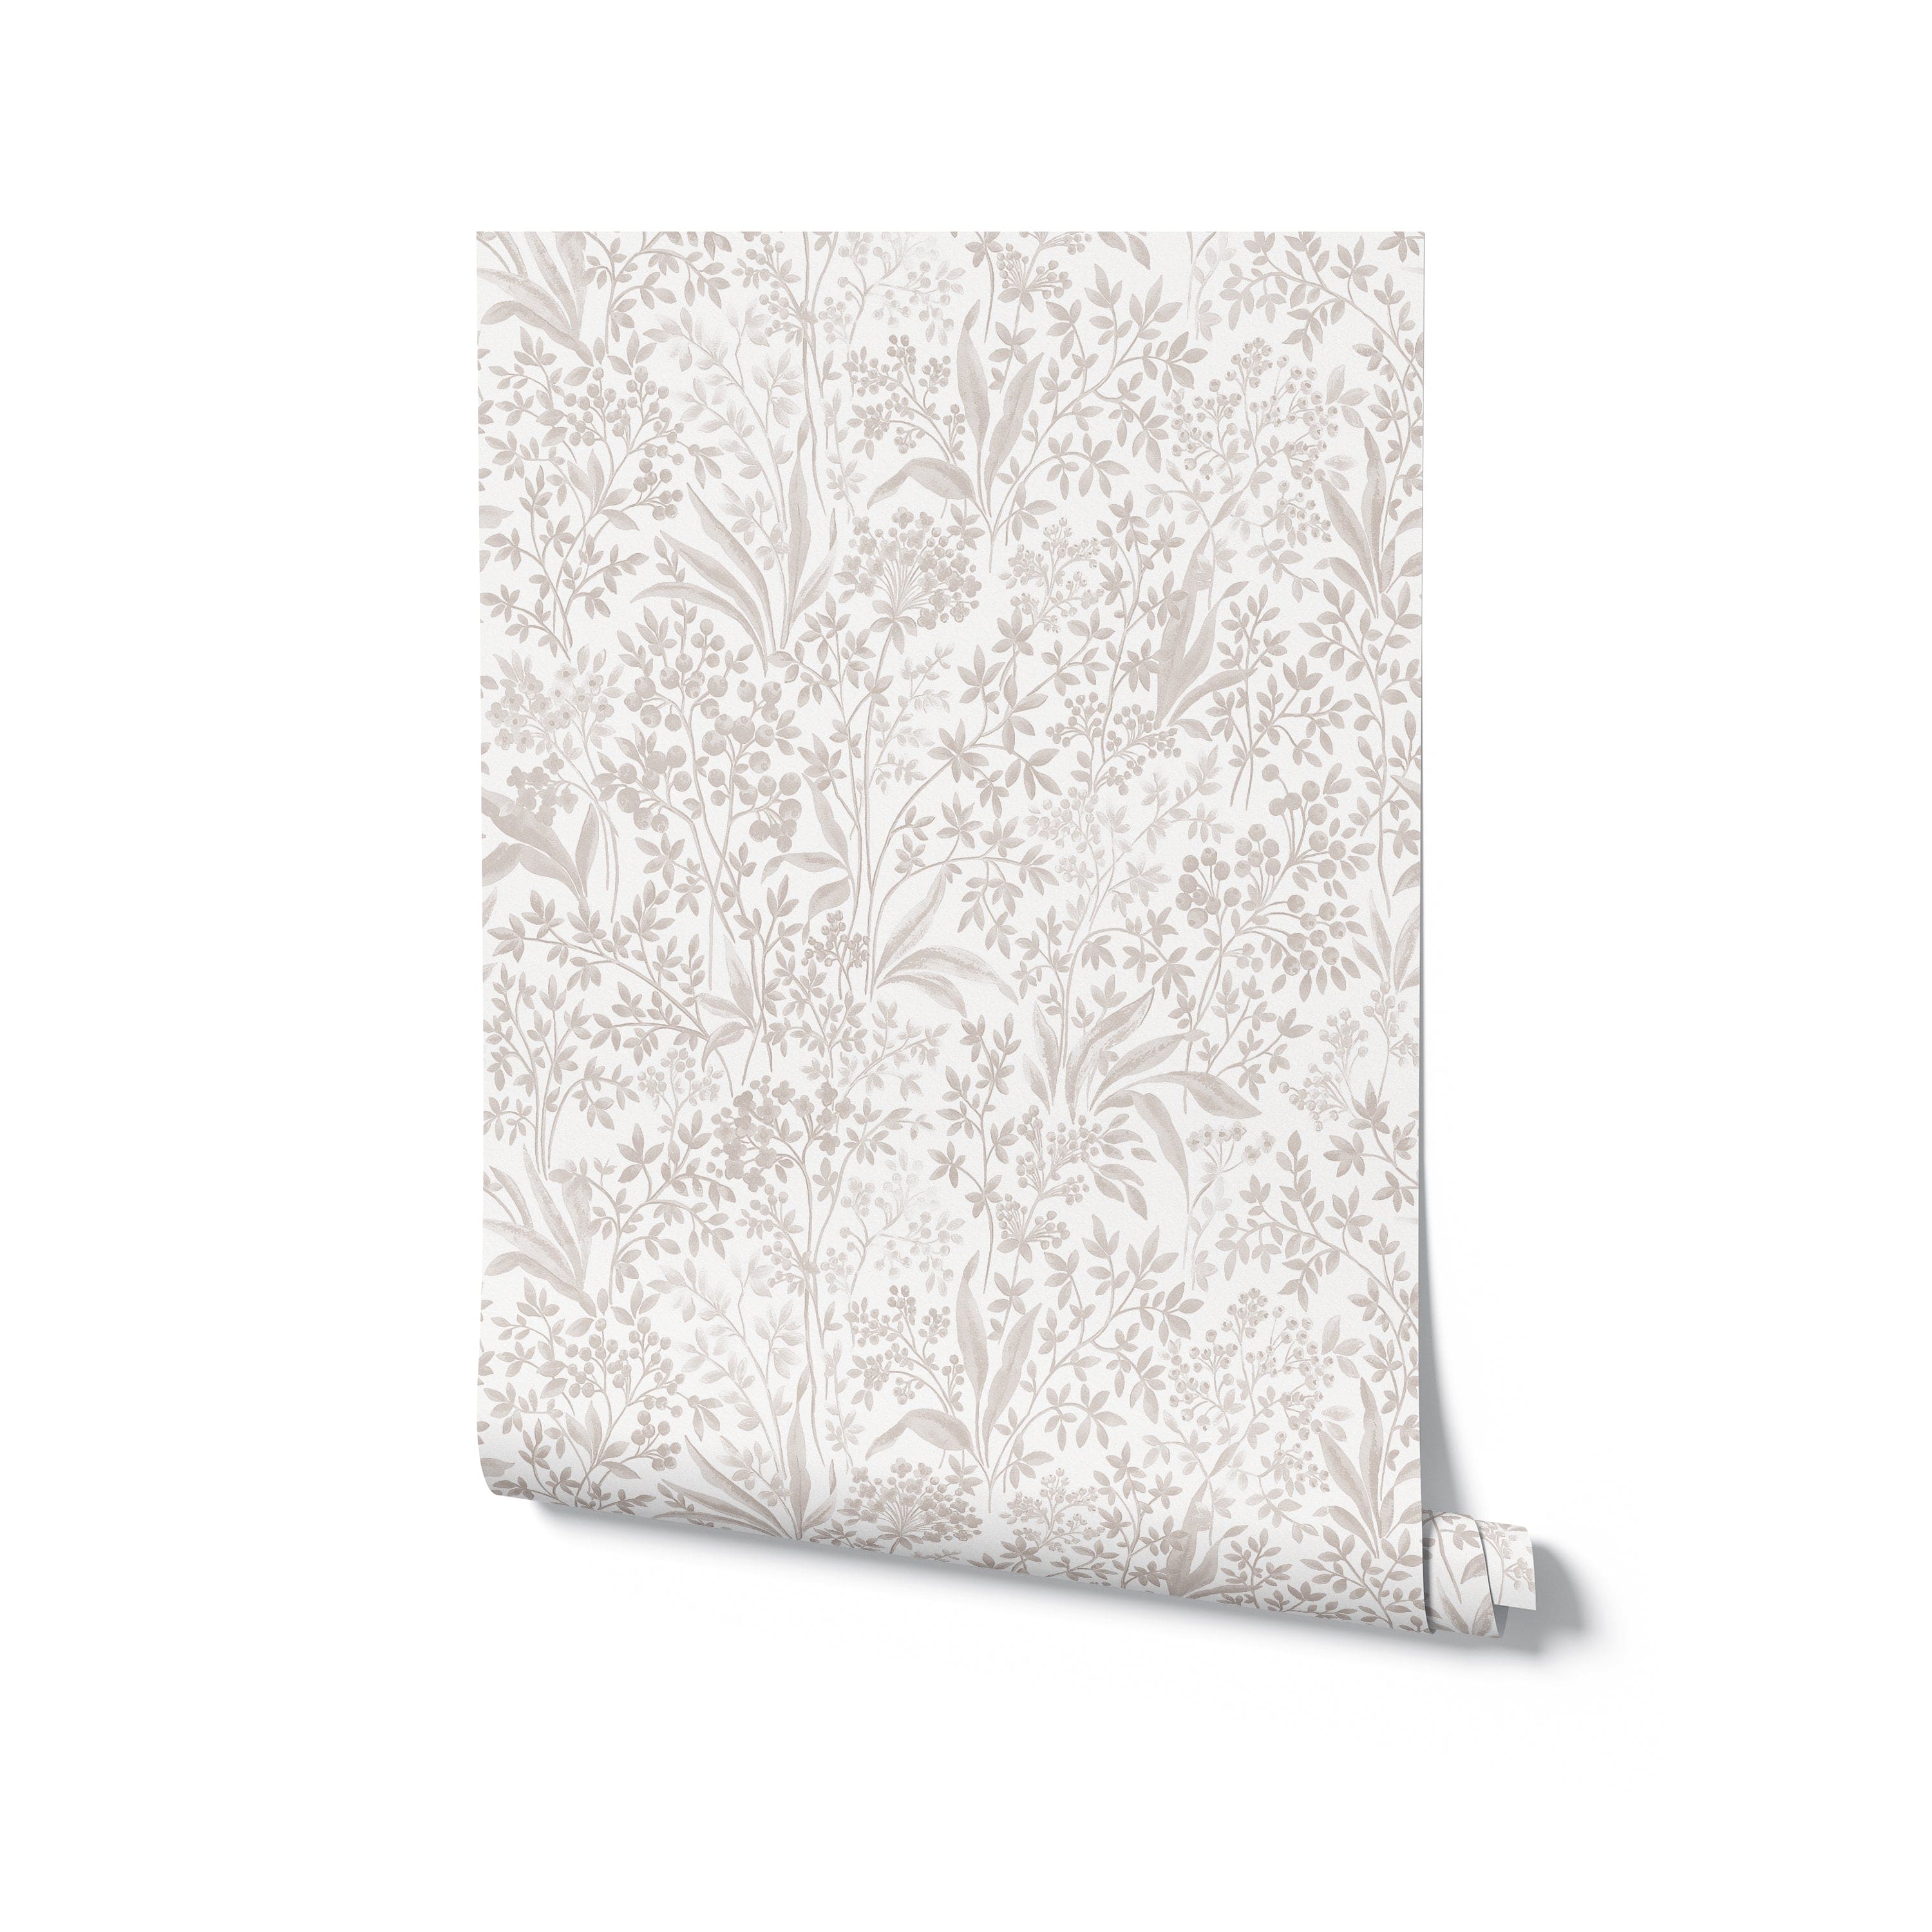 A roll of Harmony in Bloom Wallpaper, highlighting an intricate floral pattern in muted gray and beige hues on a white background. This wallpaper brings a touch of timeless beauty to any room, perfect for creating a serene and stylish space.